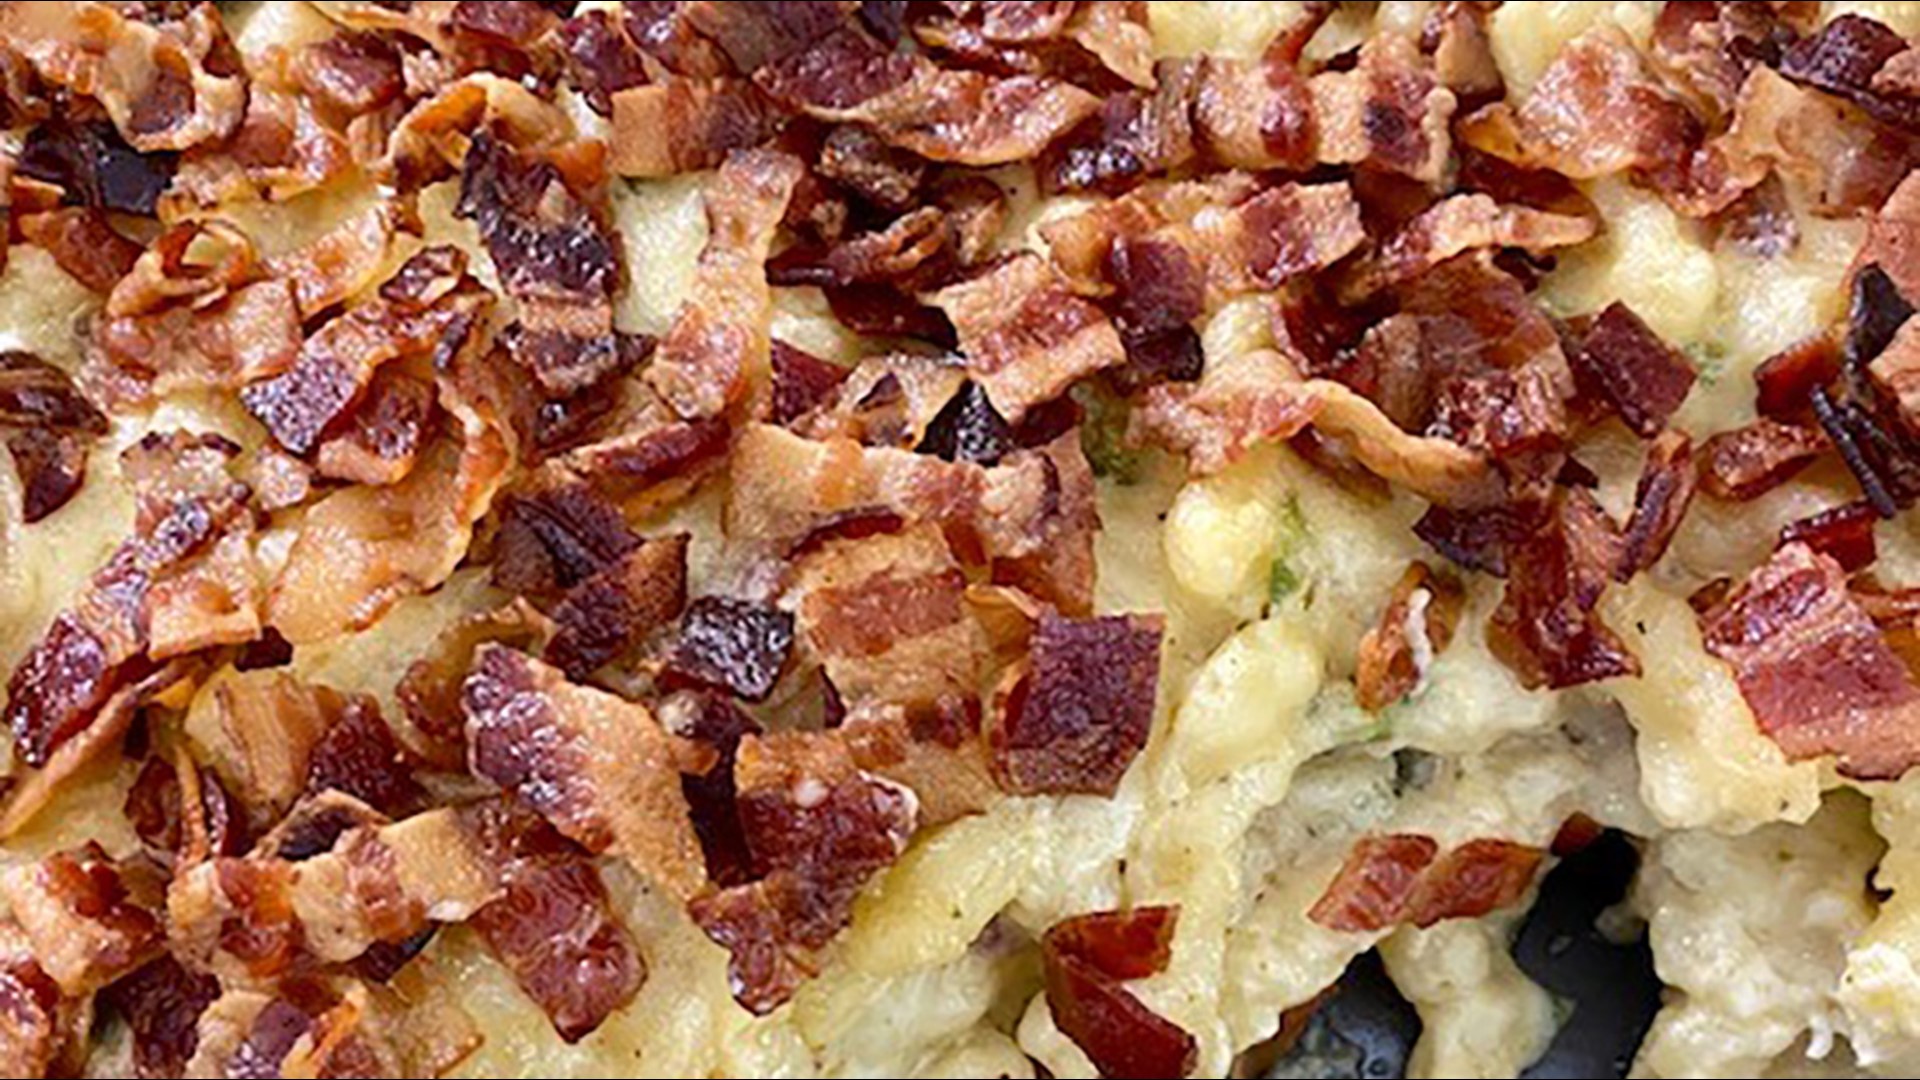 Jalapeño Bacon Mac & Cheese topped with Bacon Sprinkles